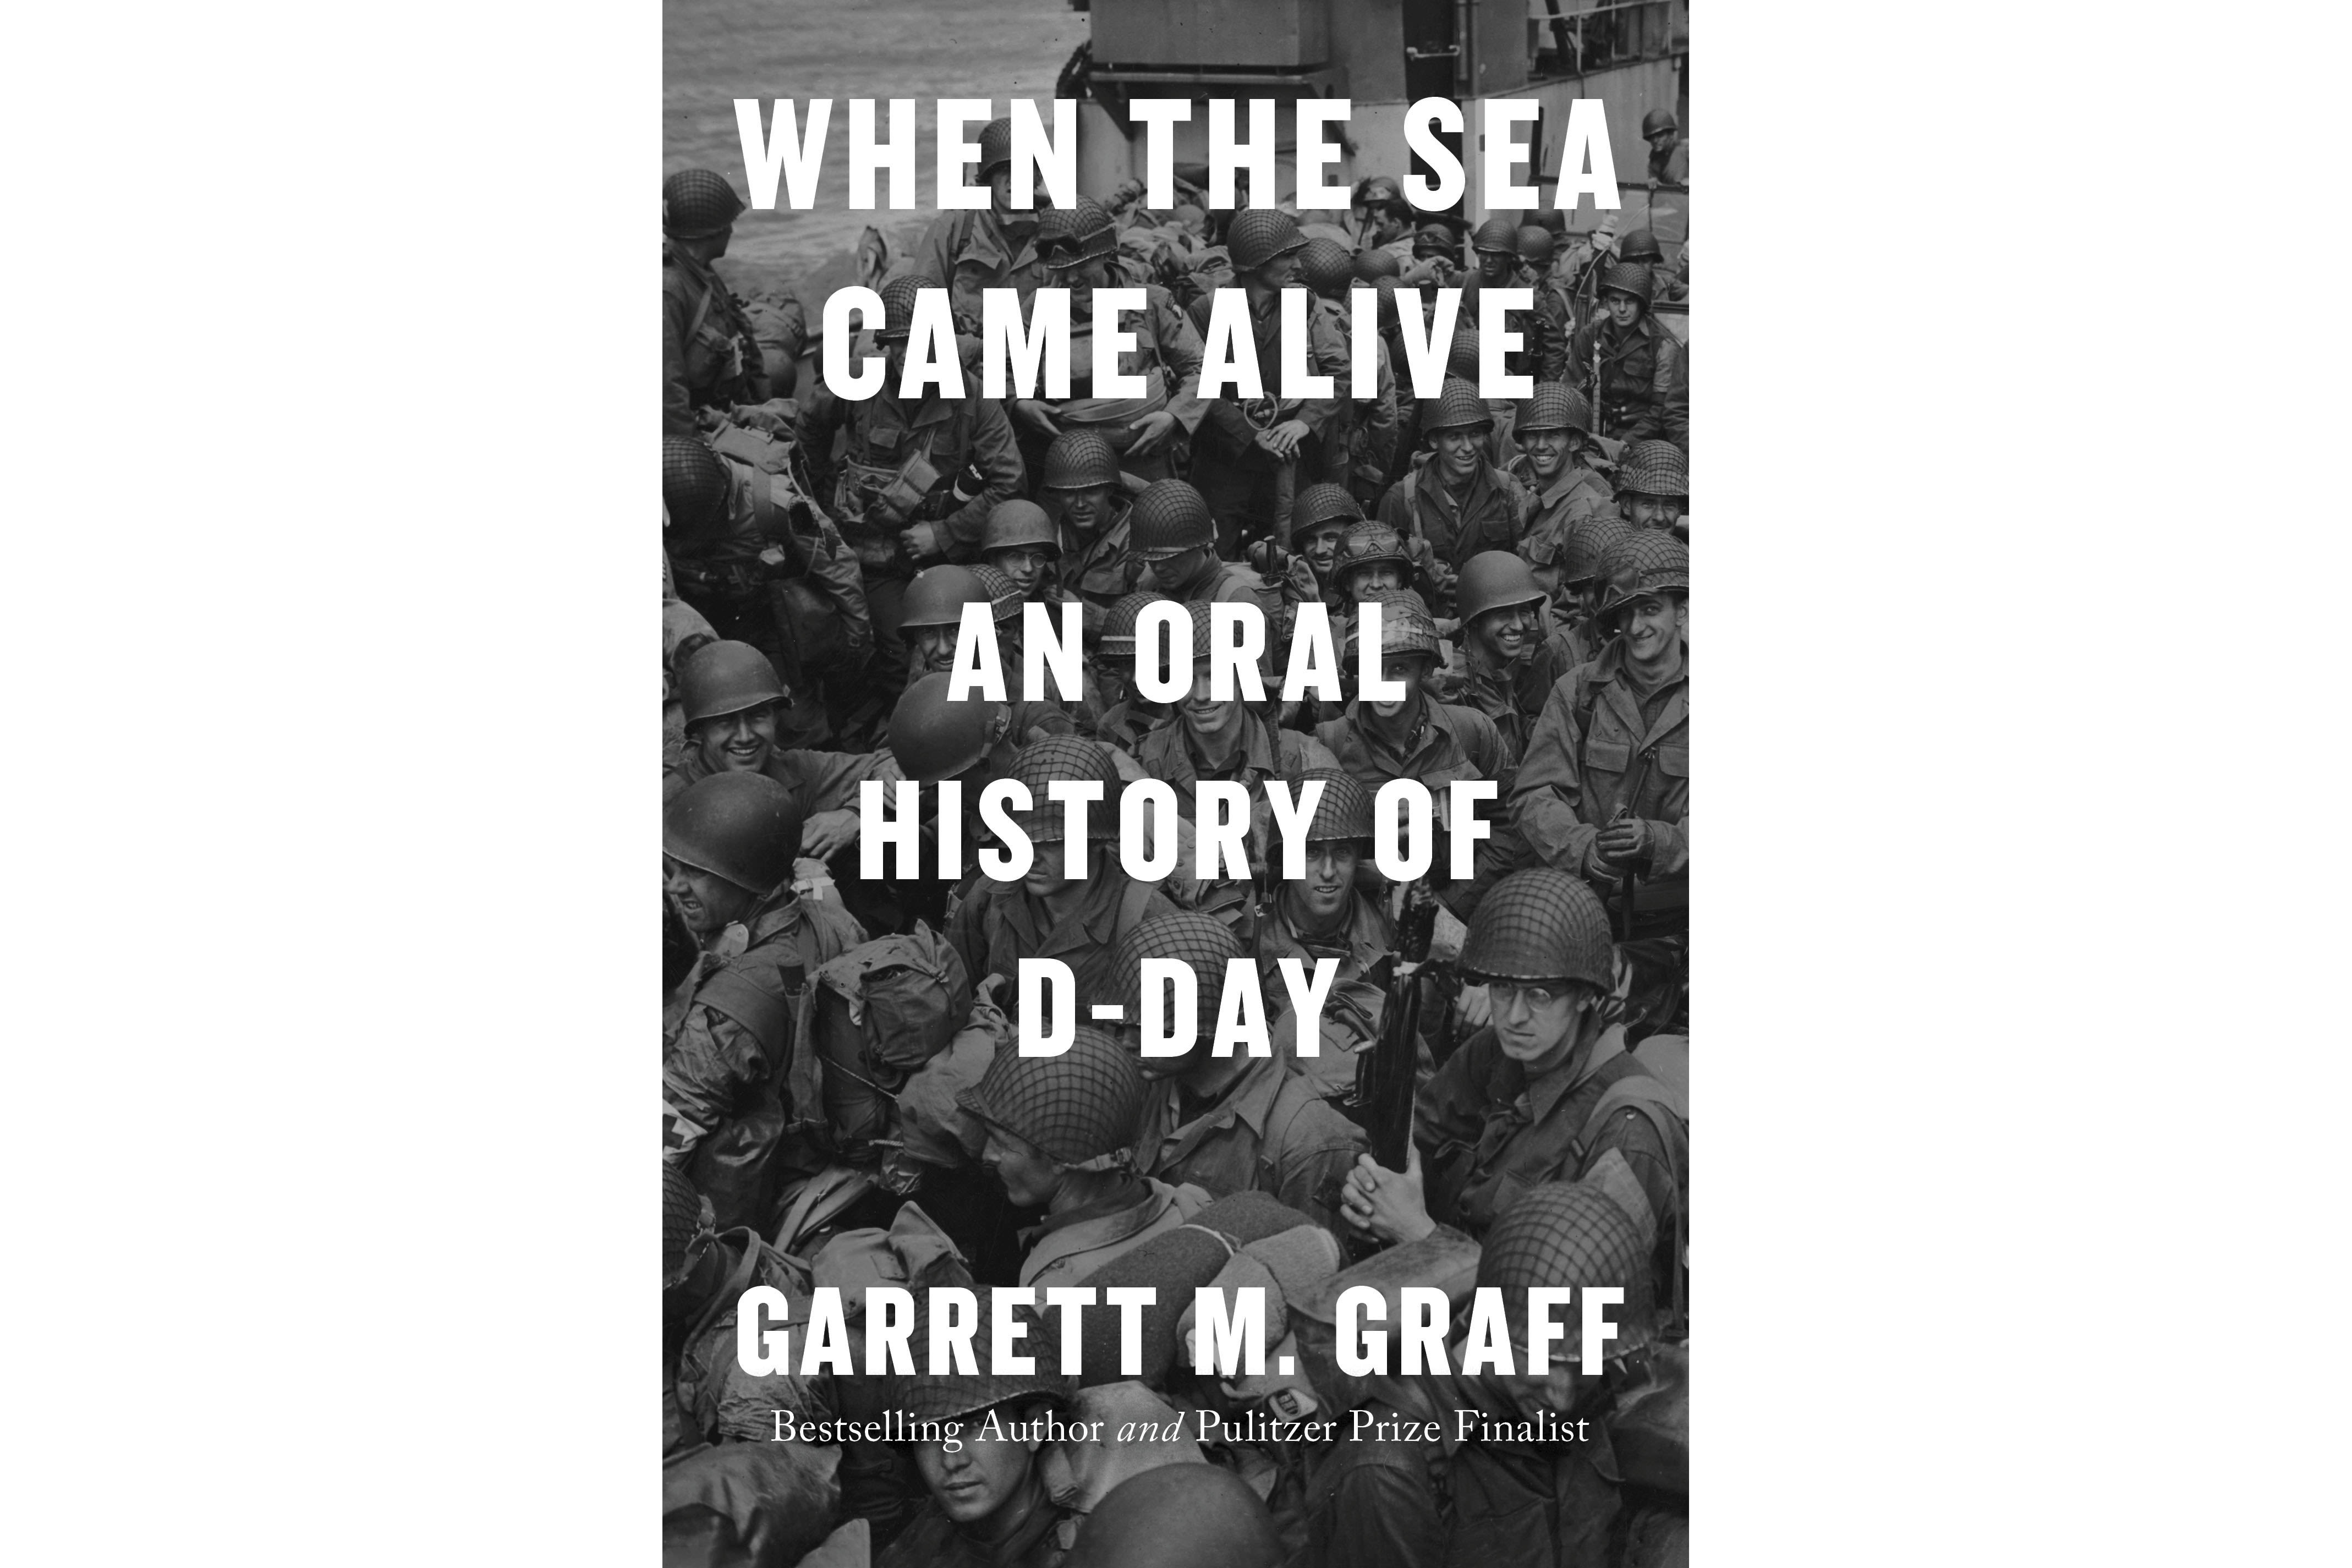 Book Review: 'When the Sea Came Alive' expands understanding of D-Day invasion